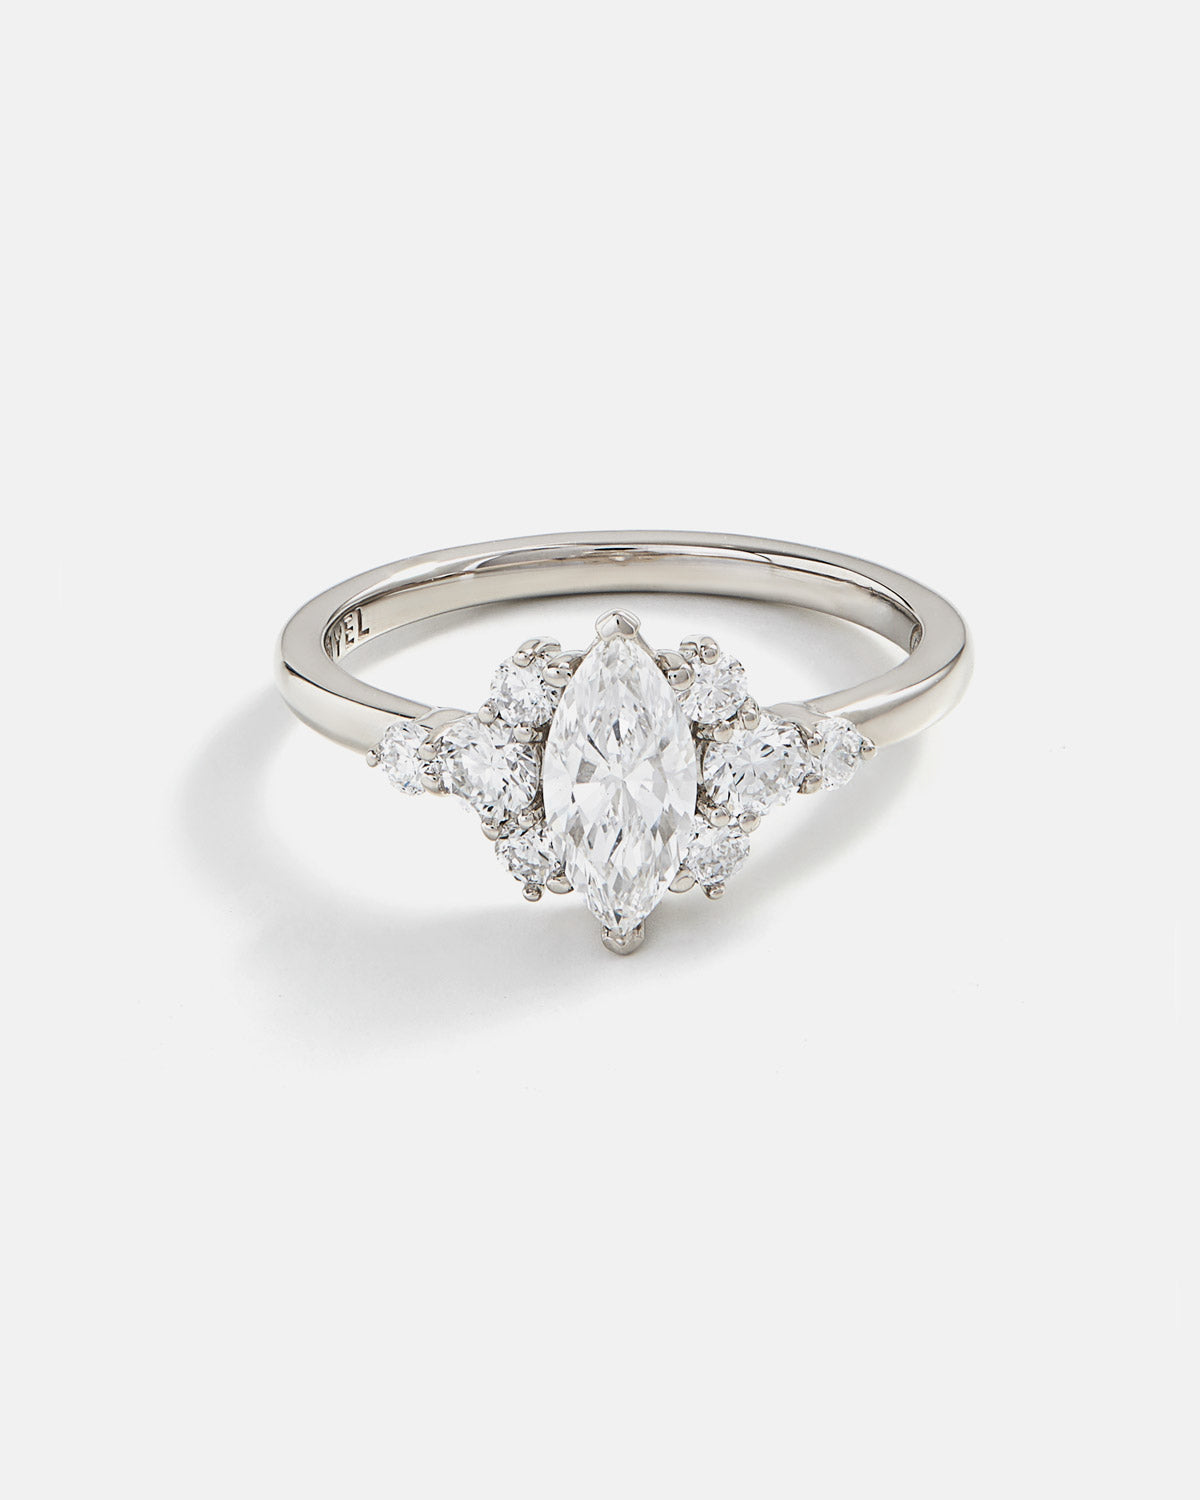 Custom Ring - Cluster Marquise Ring in Fairmined Gold with Lab-grown Diamonds